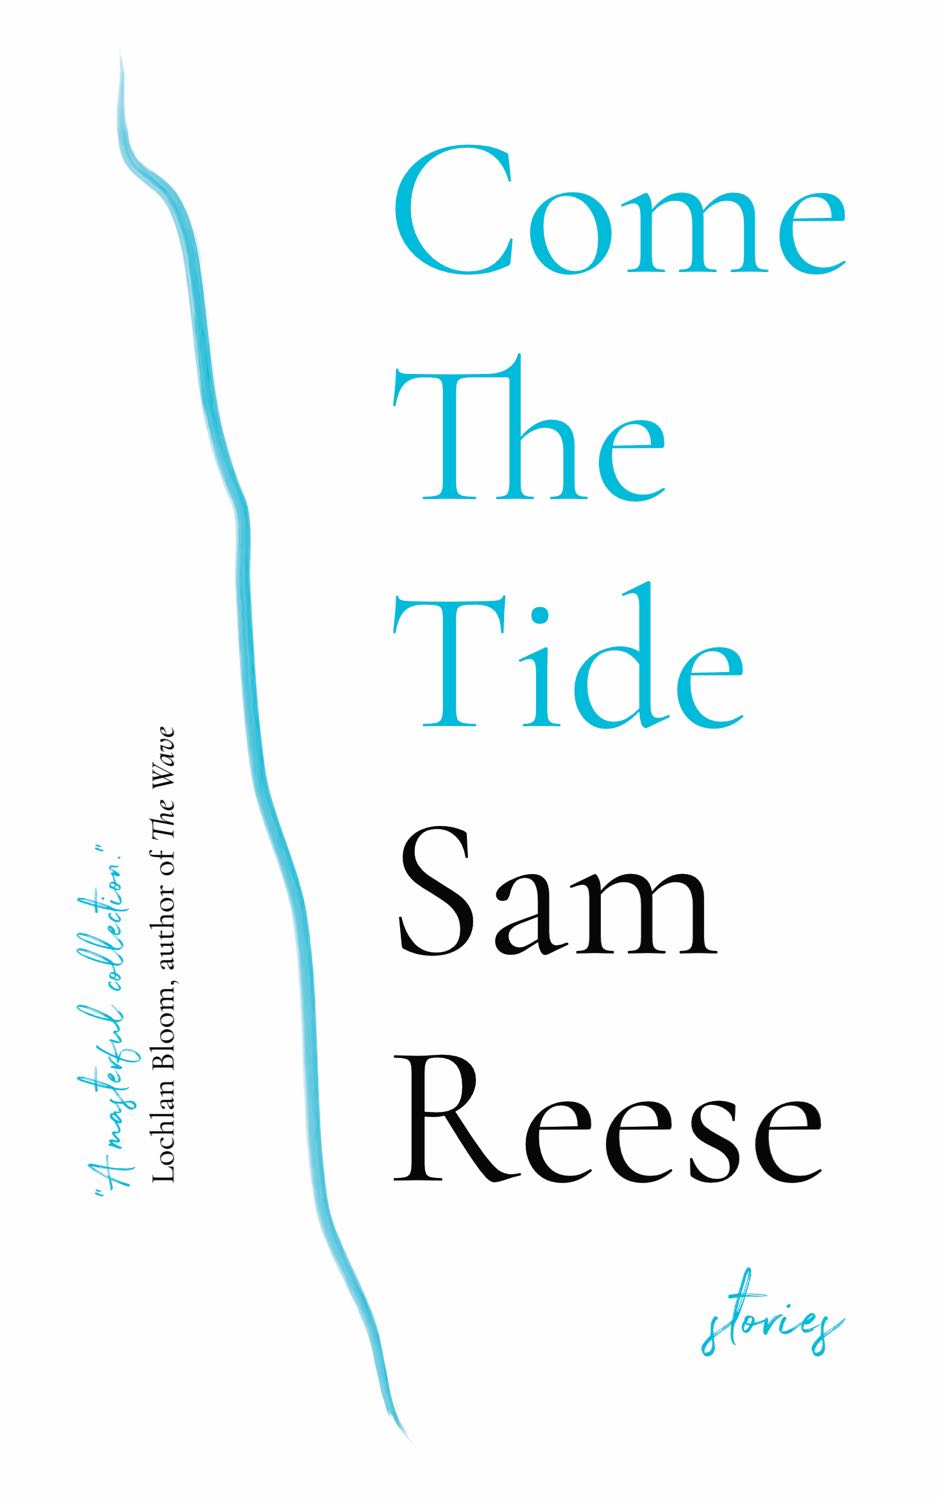 Cover features the title of the book in large text and a stylised stroke representing the tide/cliff.